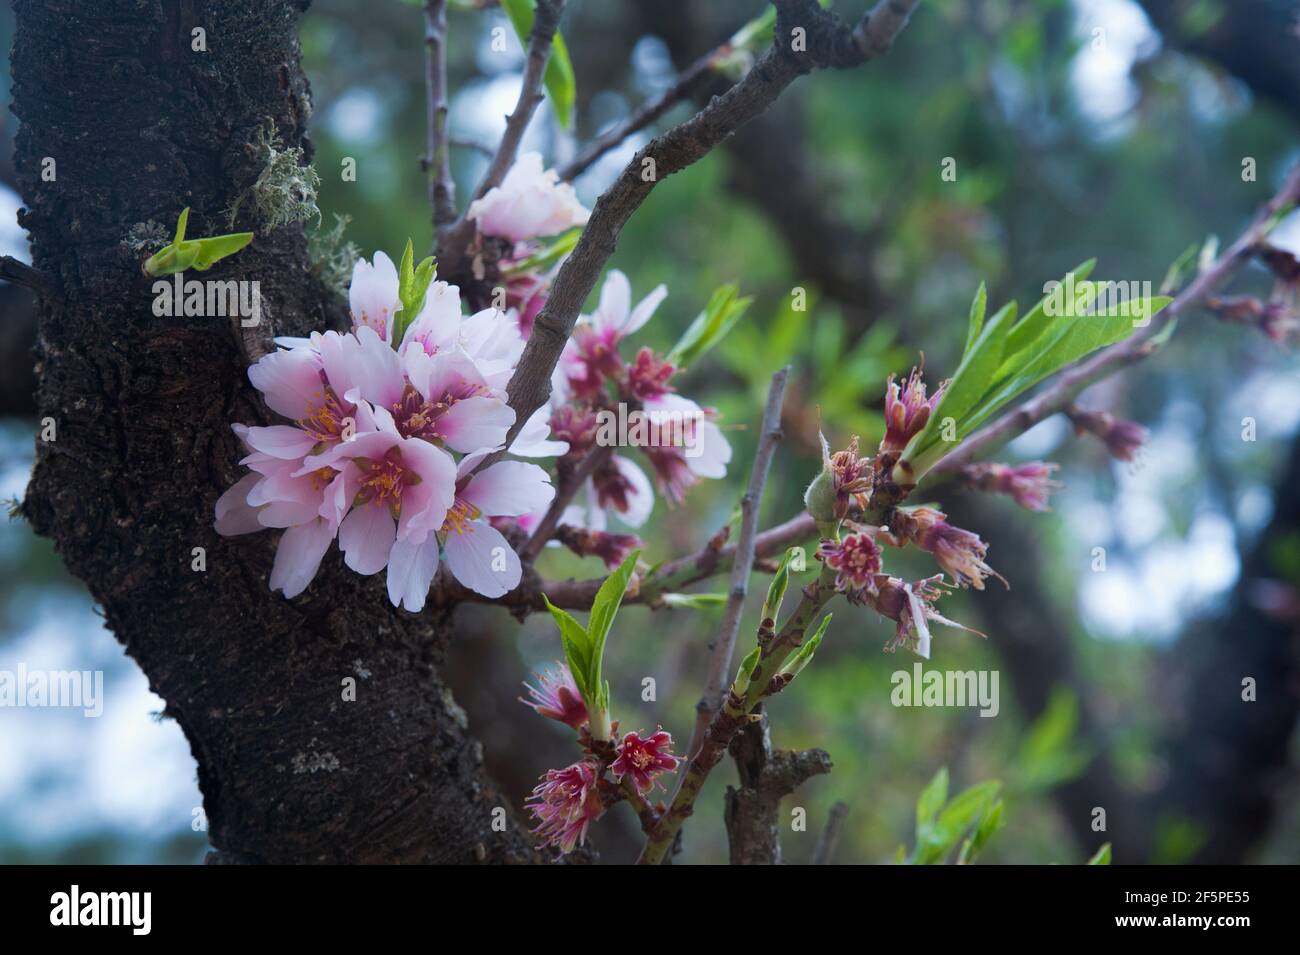 Almond flowers in bloom. Pale pink Prunus dulcis flowers blossoming in spring, growing naturally in groves or farmed for the delicious seeds. Stock Photo